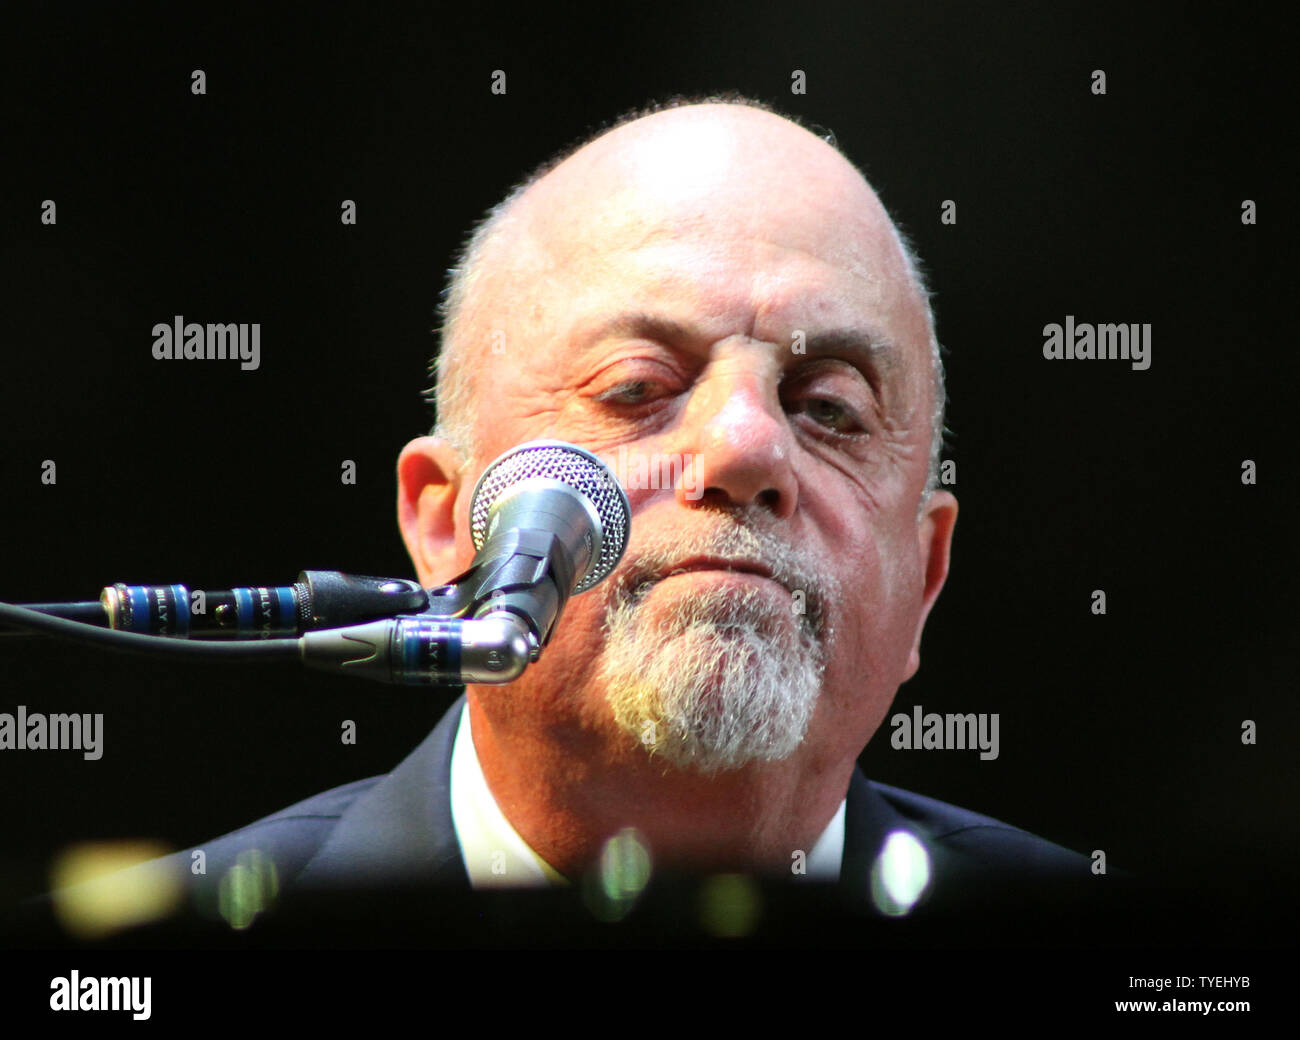 Billy Joel performs in concert at the BB & T Center in Sunrise, Florida on January 11, 2014.  UPI/Michael Bush Stock Photo